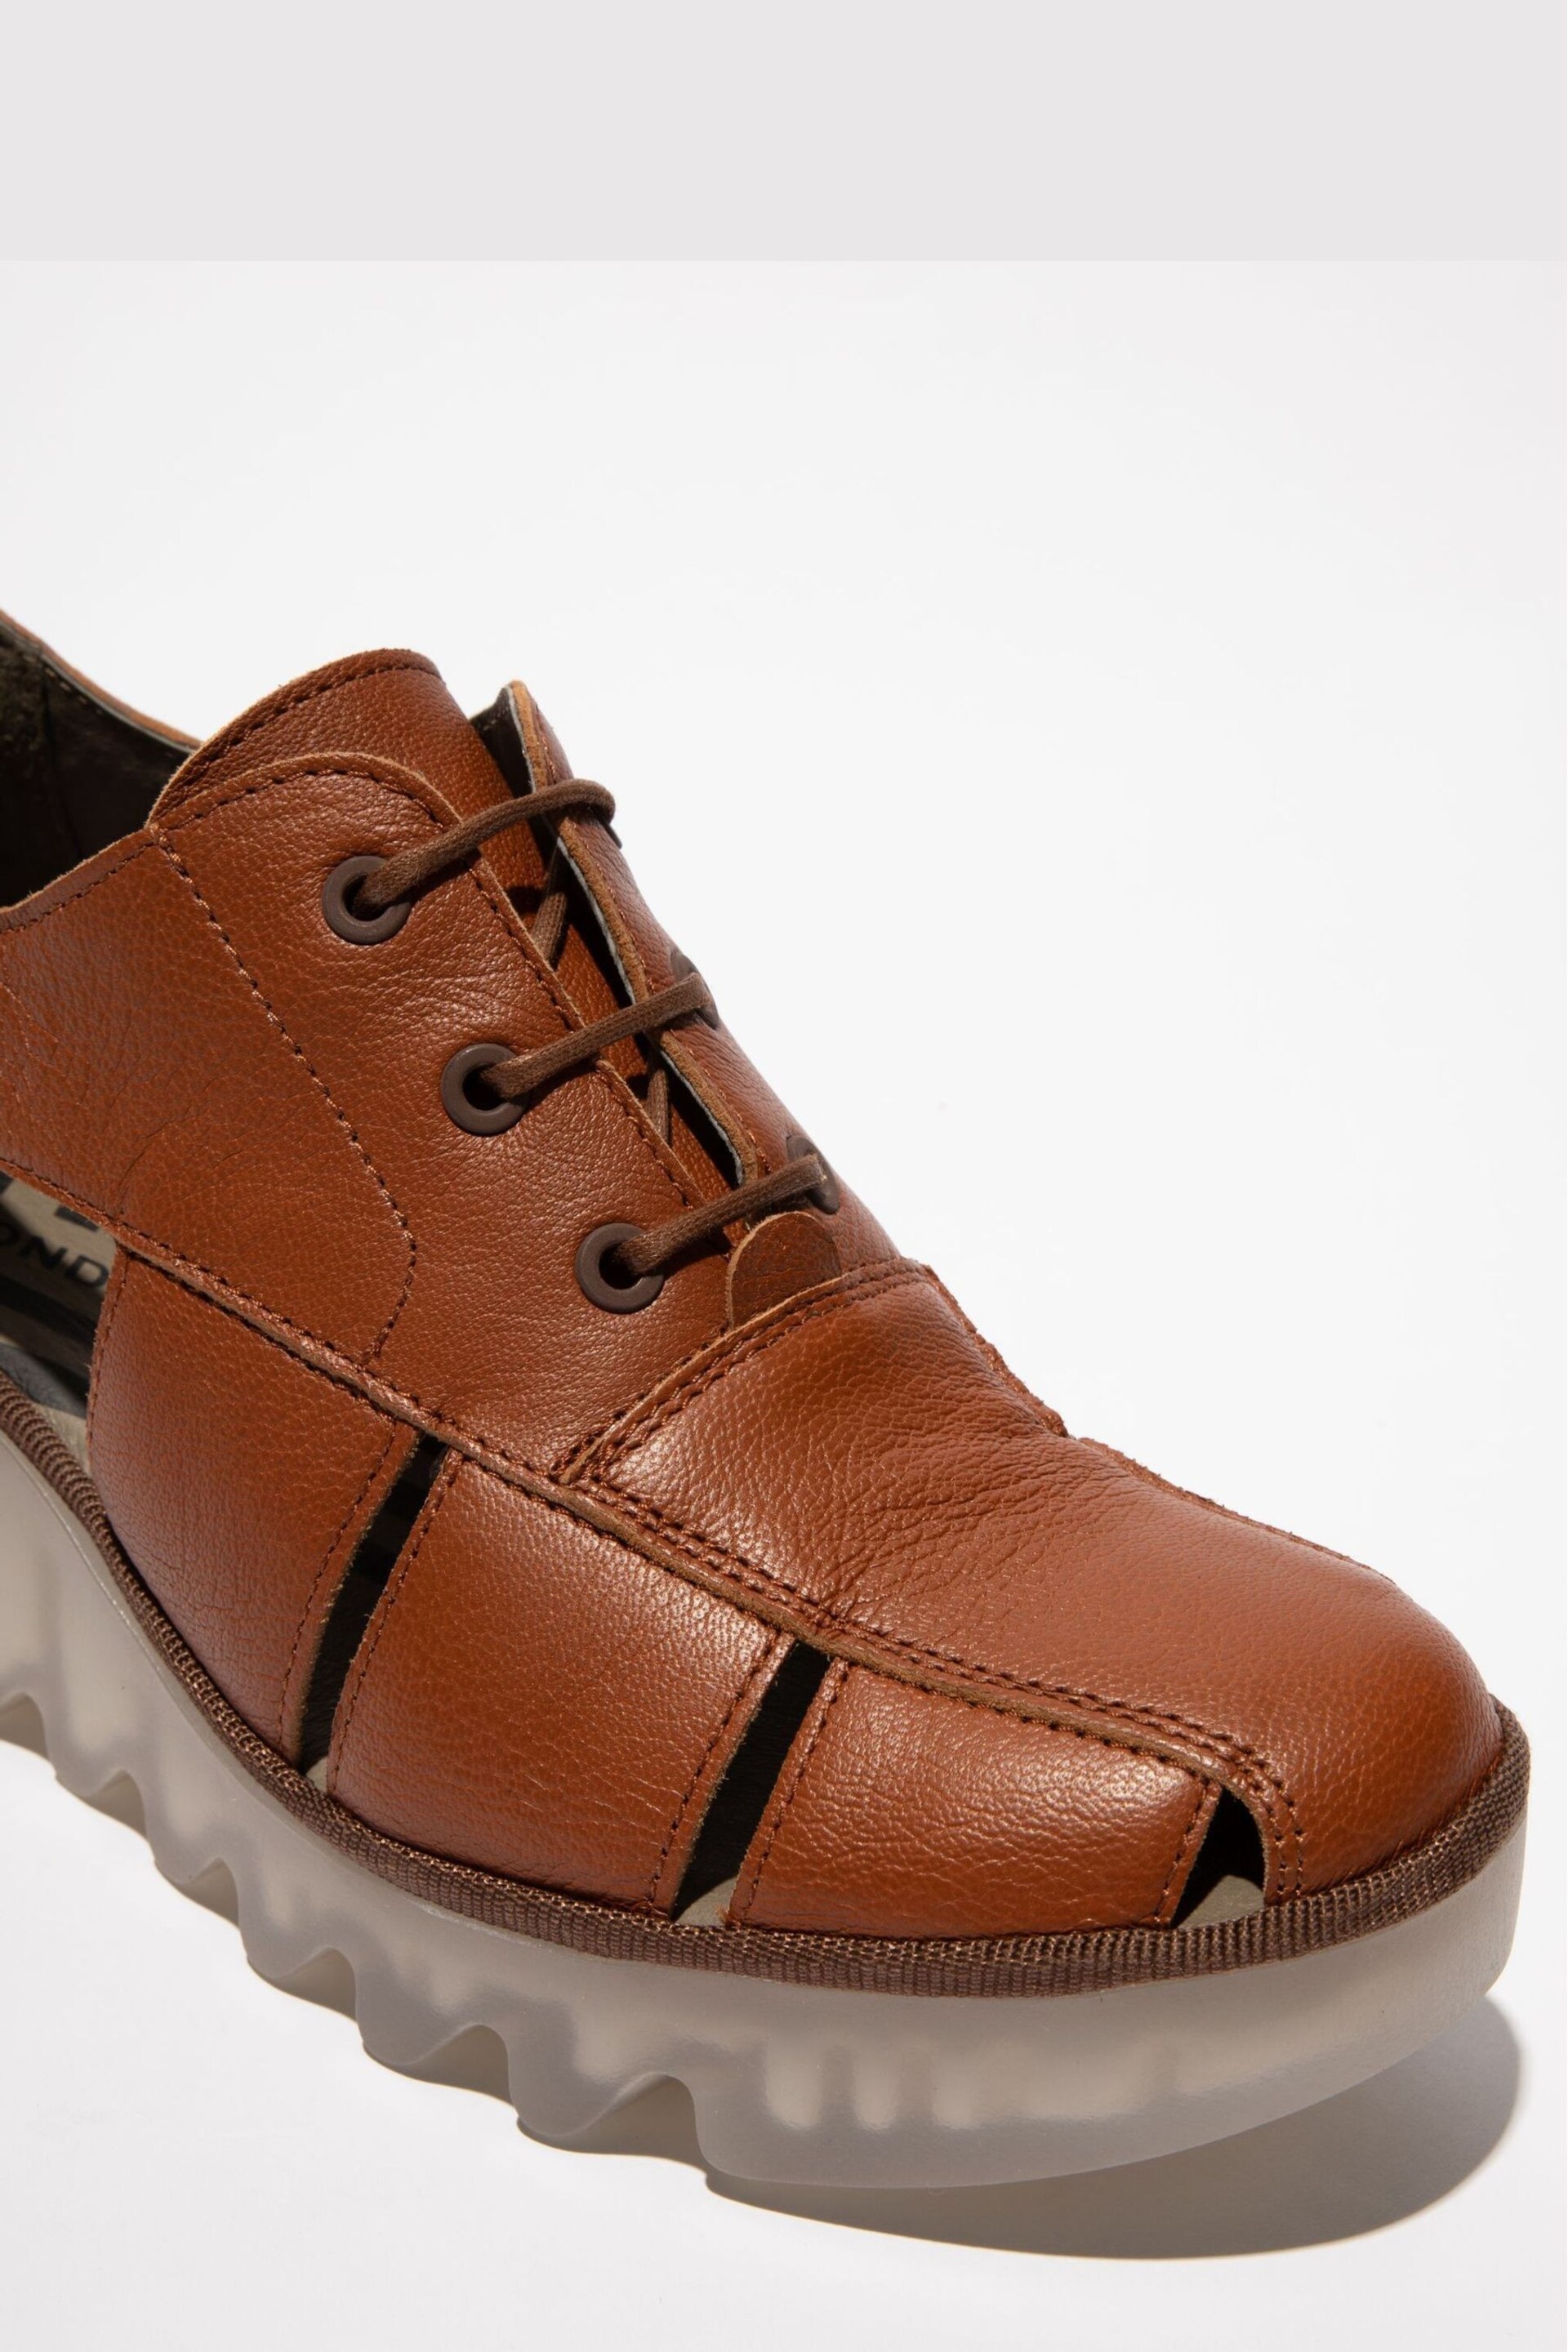 Fly London Bogi Brown Shoes - Image 4 of 4